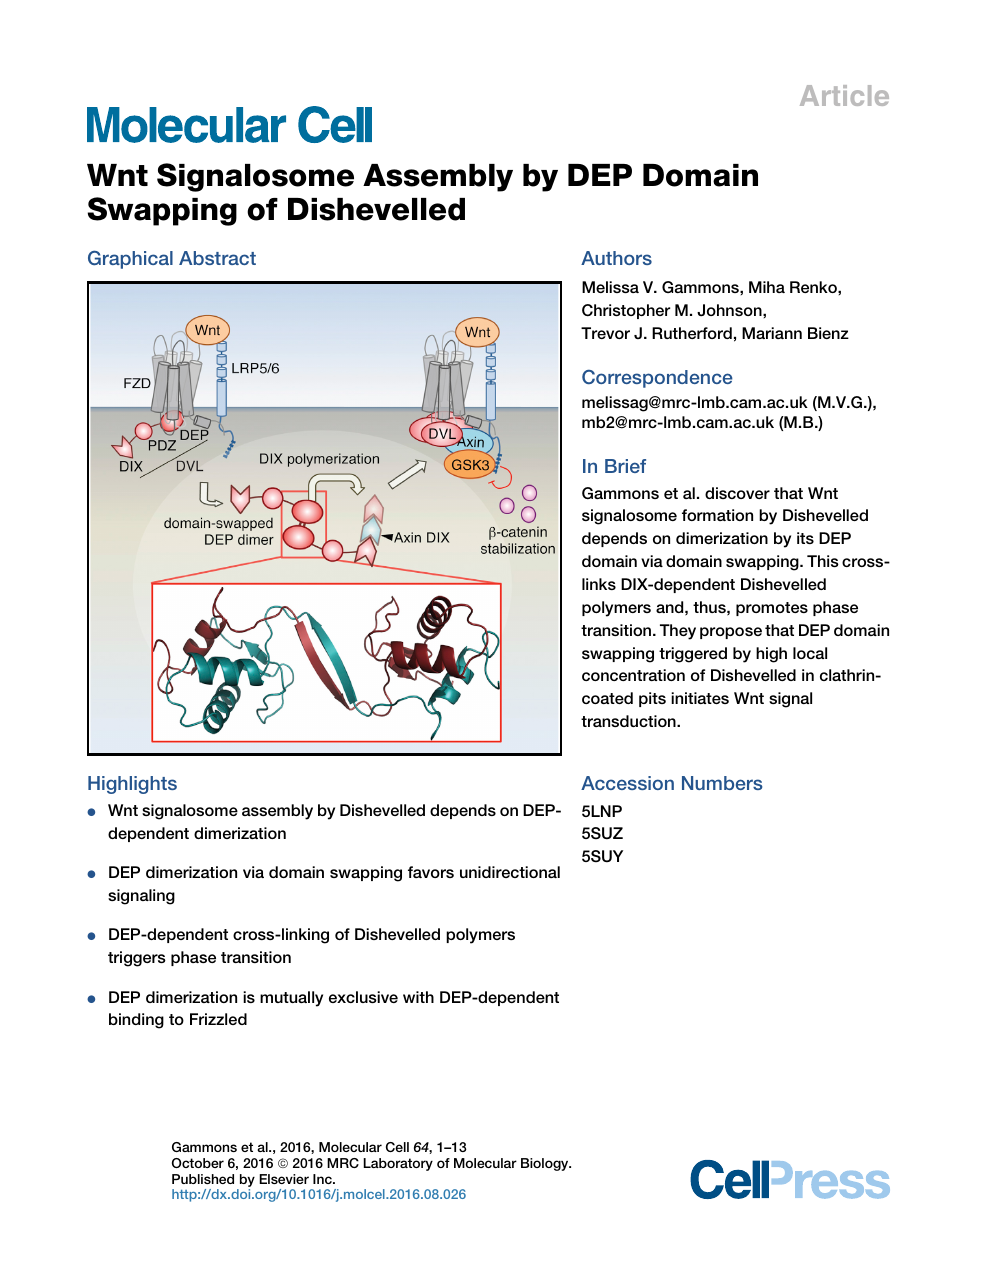 Wnt Signalosome Assembly By Dep Domain Swapping Of Dishevelled Topic Of Research Paper In Biological Sciences Download Scholarly Article Pdf And Read For Free On Cyberleninka Open Science Hub